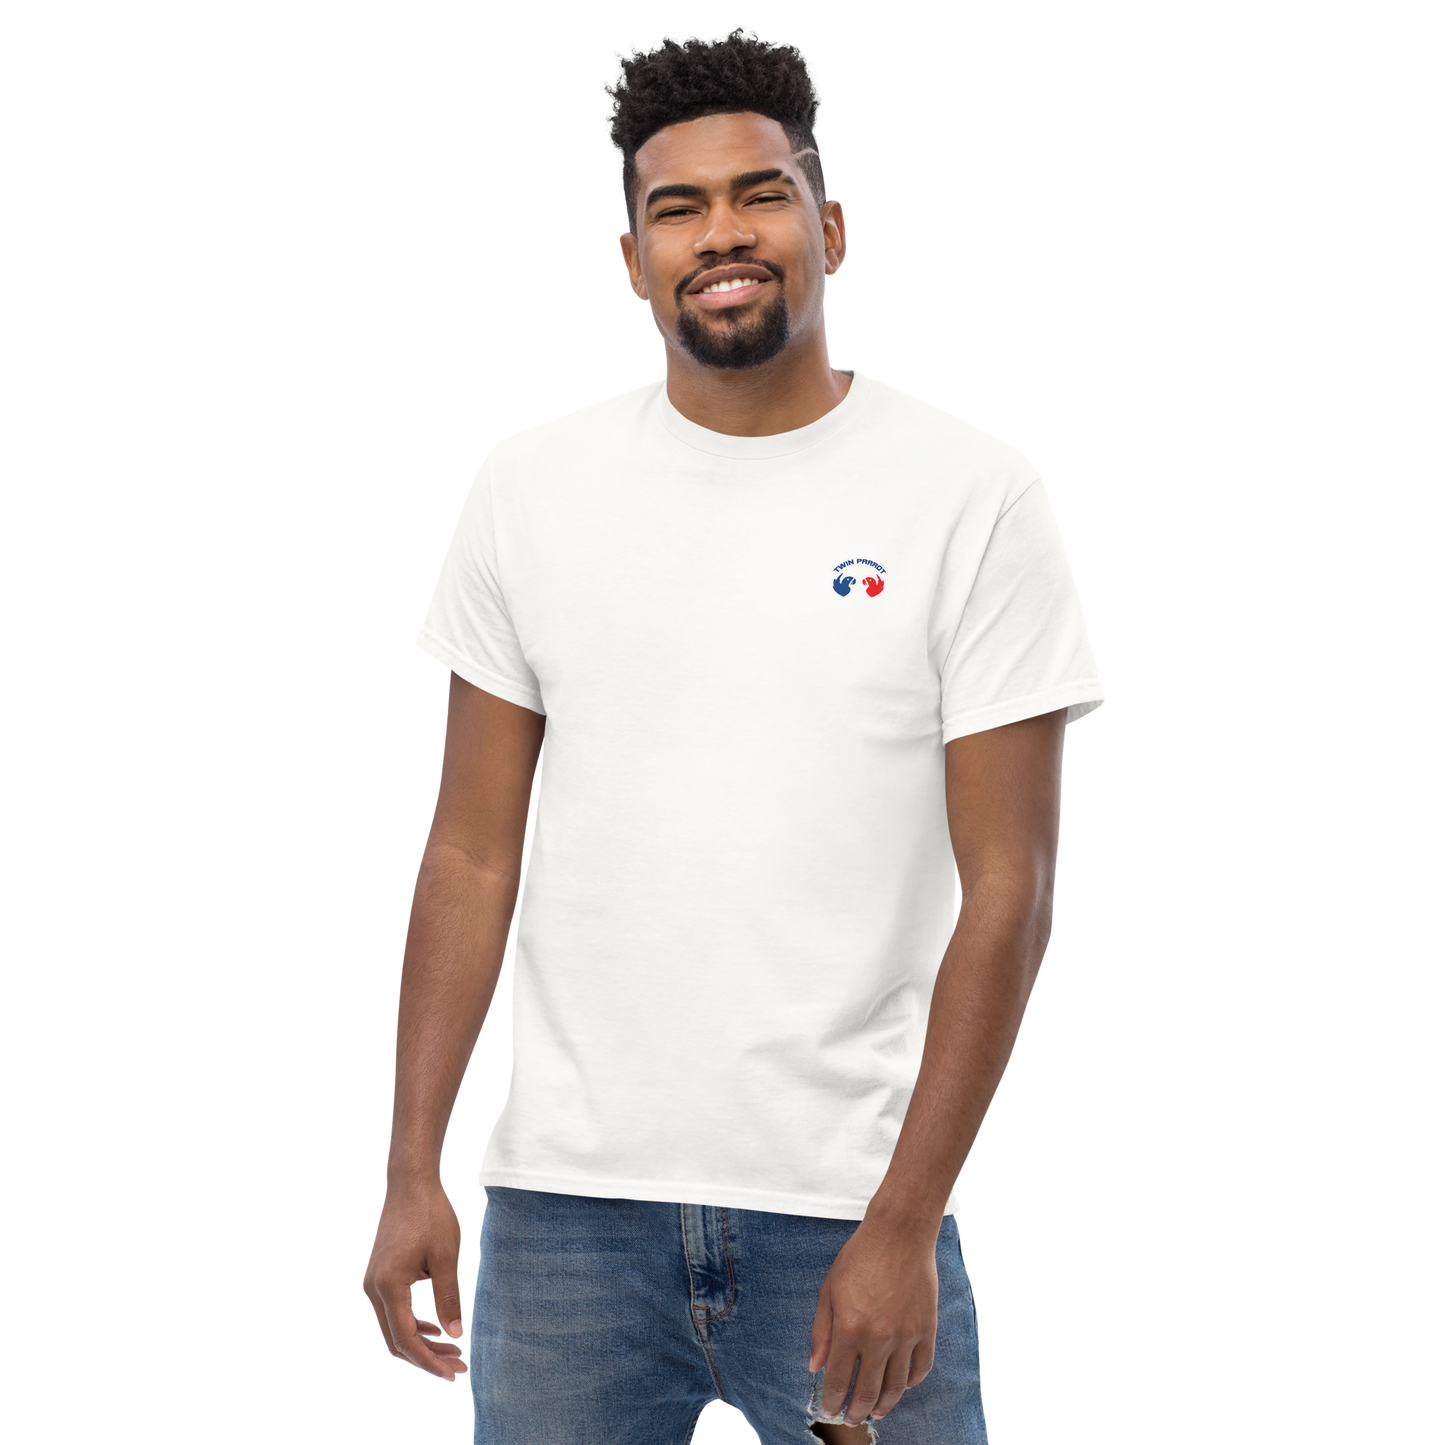 Level Up Your Streetwear: Men's Classic Tee (Structured Fit)